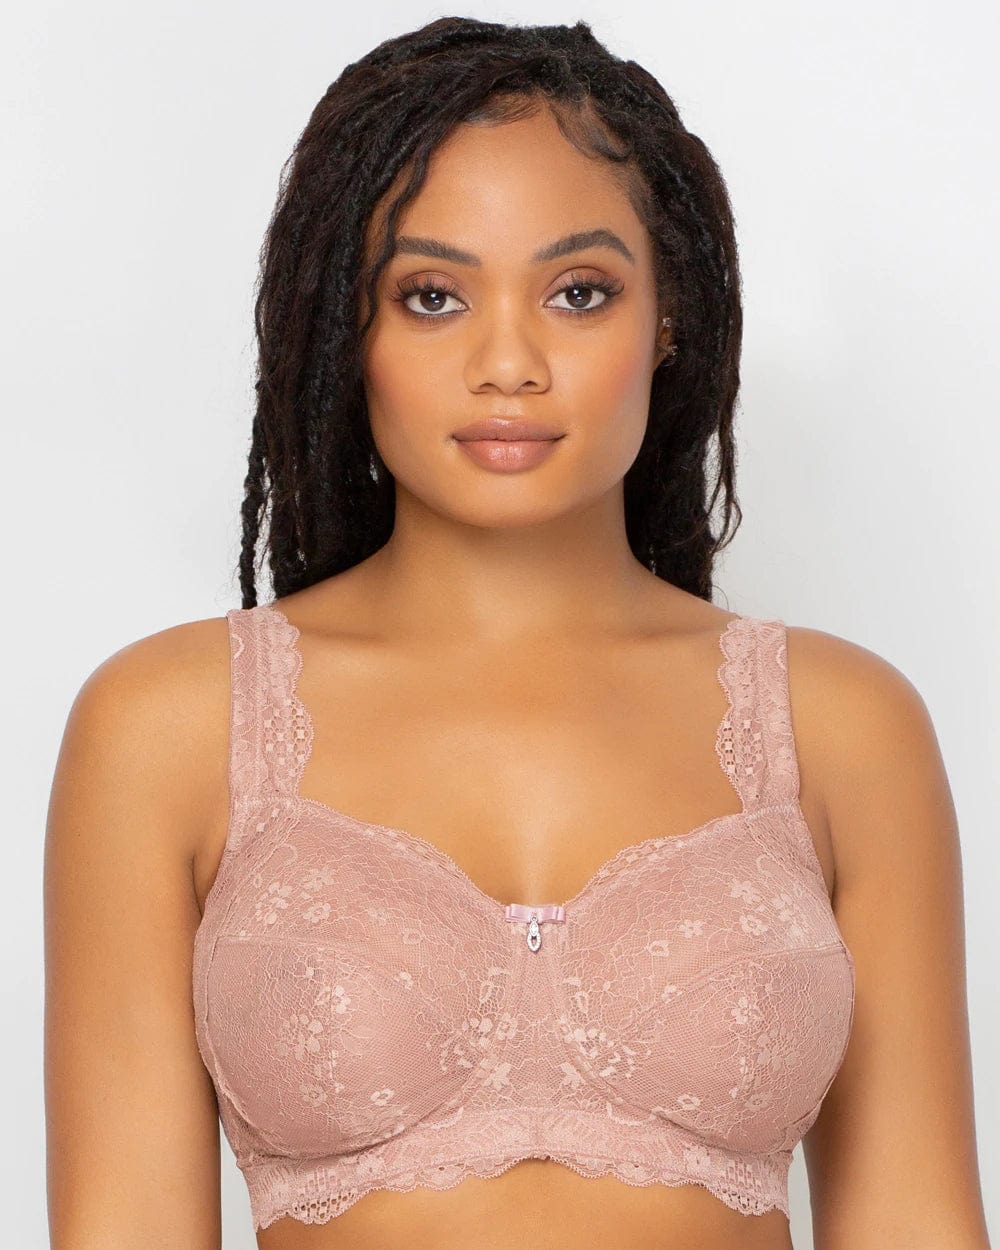 Curvy Couture Bralette Ballet Fever / 38 DD/E Luxe Lace Wireless Bra - Ballet Fever